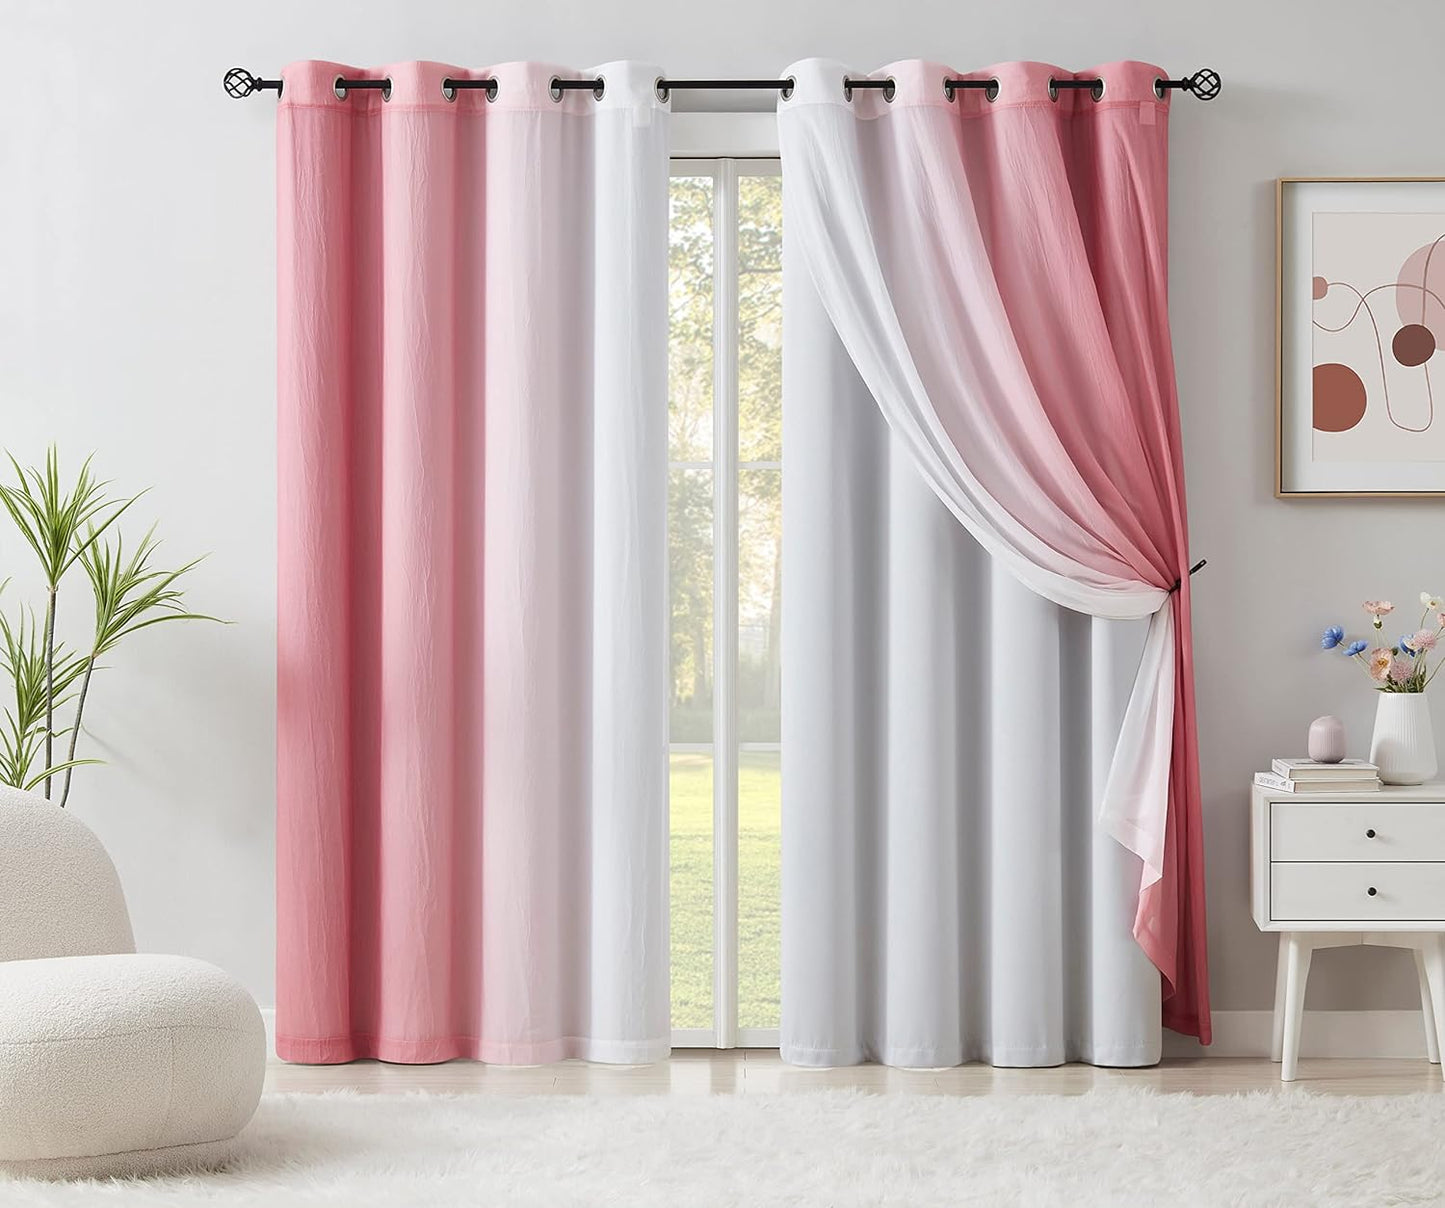 Mix and Match Blackout Curtains - Bedroom Solid Black Full Blackout Window Panels & Black Chiffon Sheer Curtains Thermal Insulated Drapes for Living Room, Grommet, 52" W X 63" L, Set of 4  Purainbow Pink/White 52" X 63" 